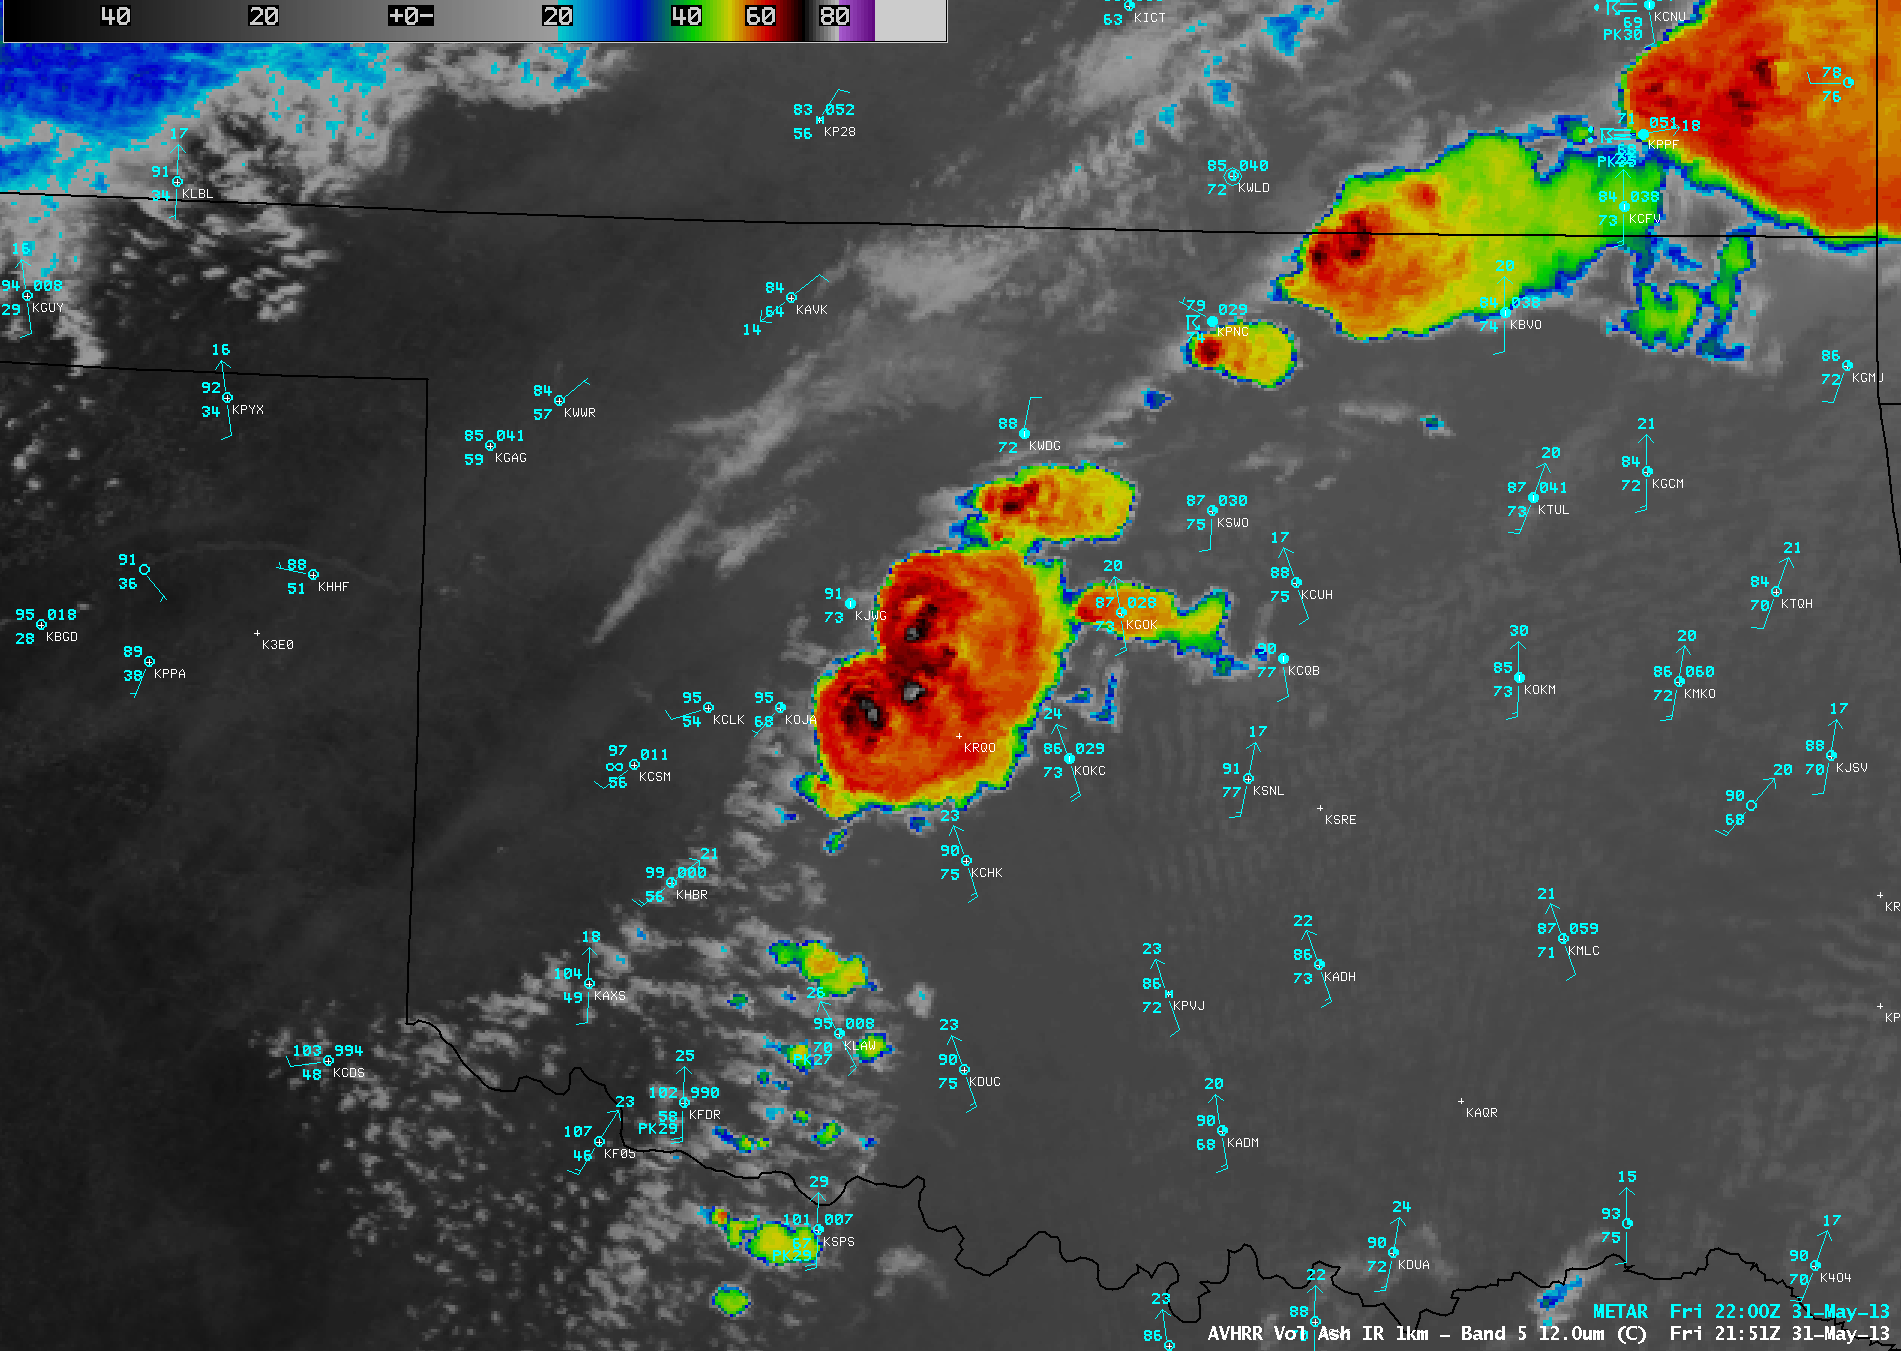 AVHRR IR satellite image from 4:51 pm CDT on May 31, 2013